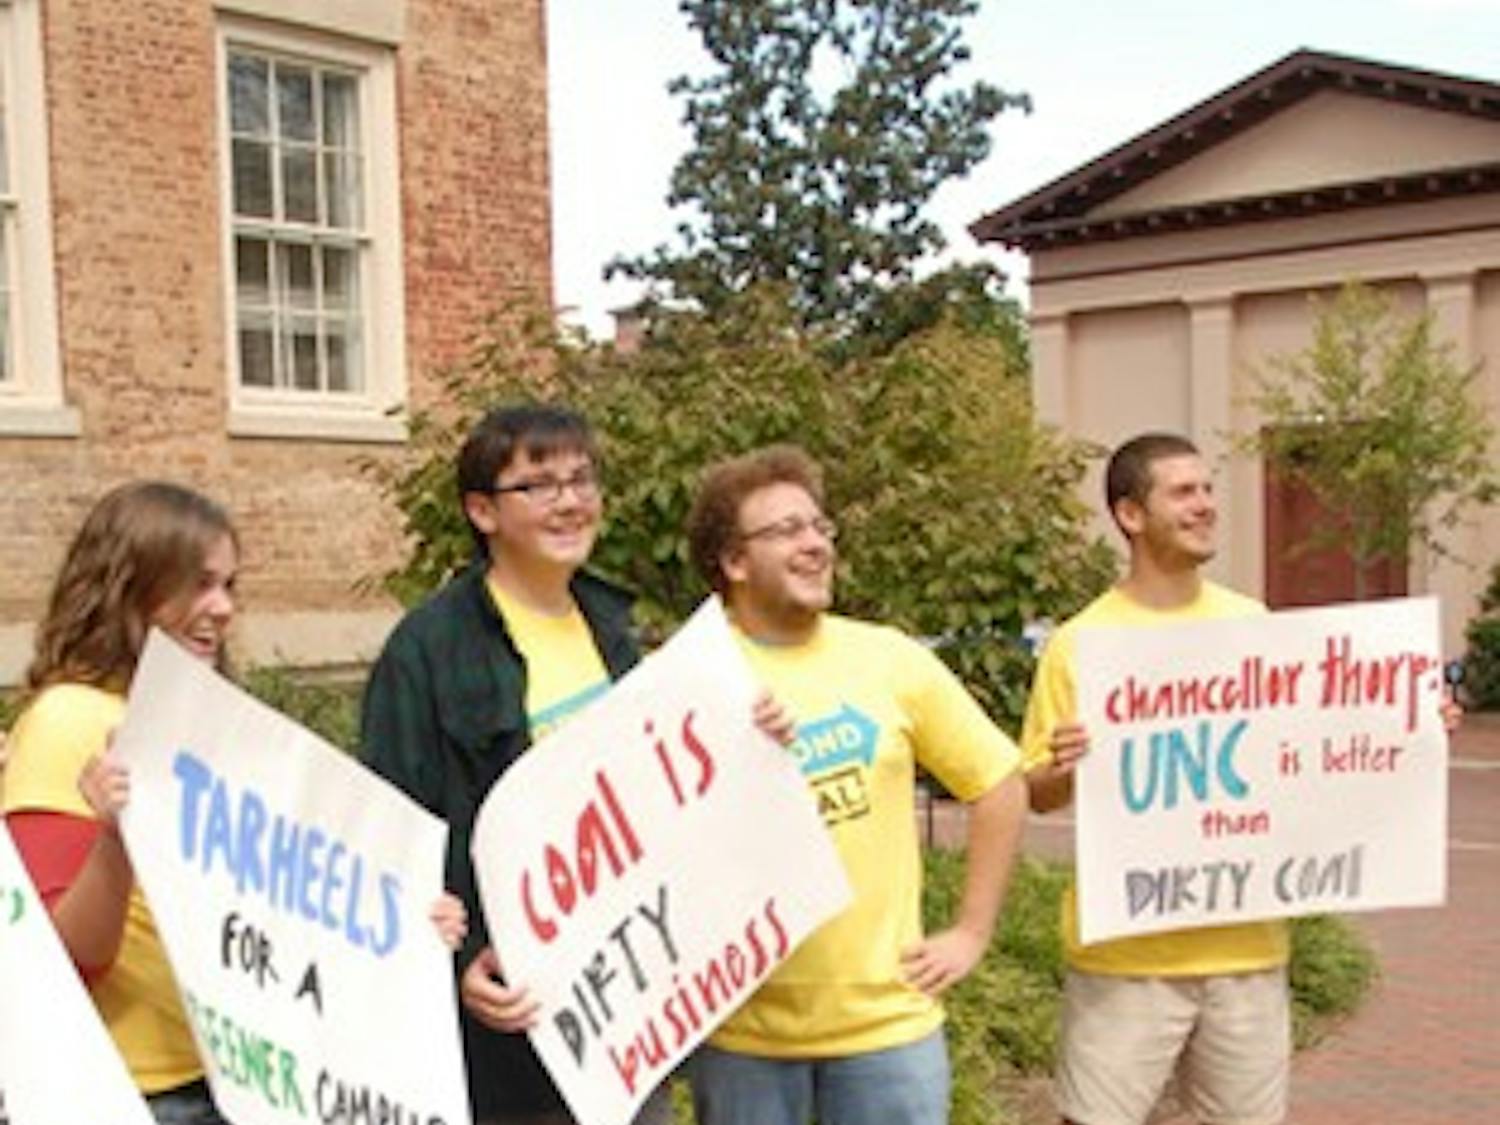 Environmental advocates were more subdued than in the past, as the University has already committed to being coal-free by 2020.